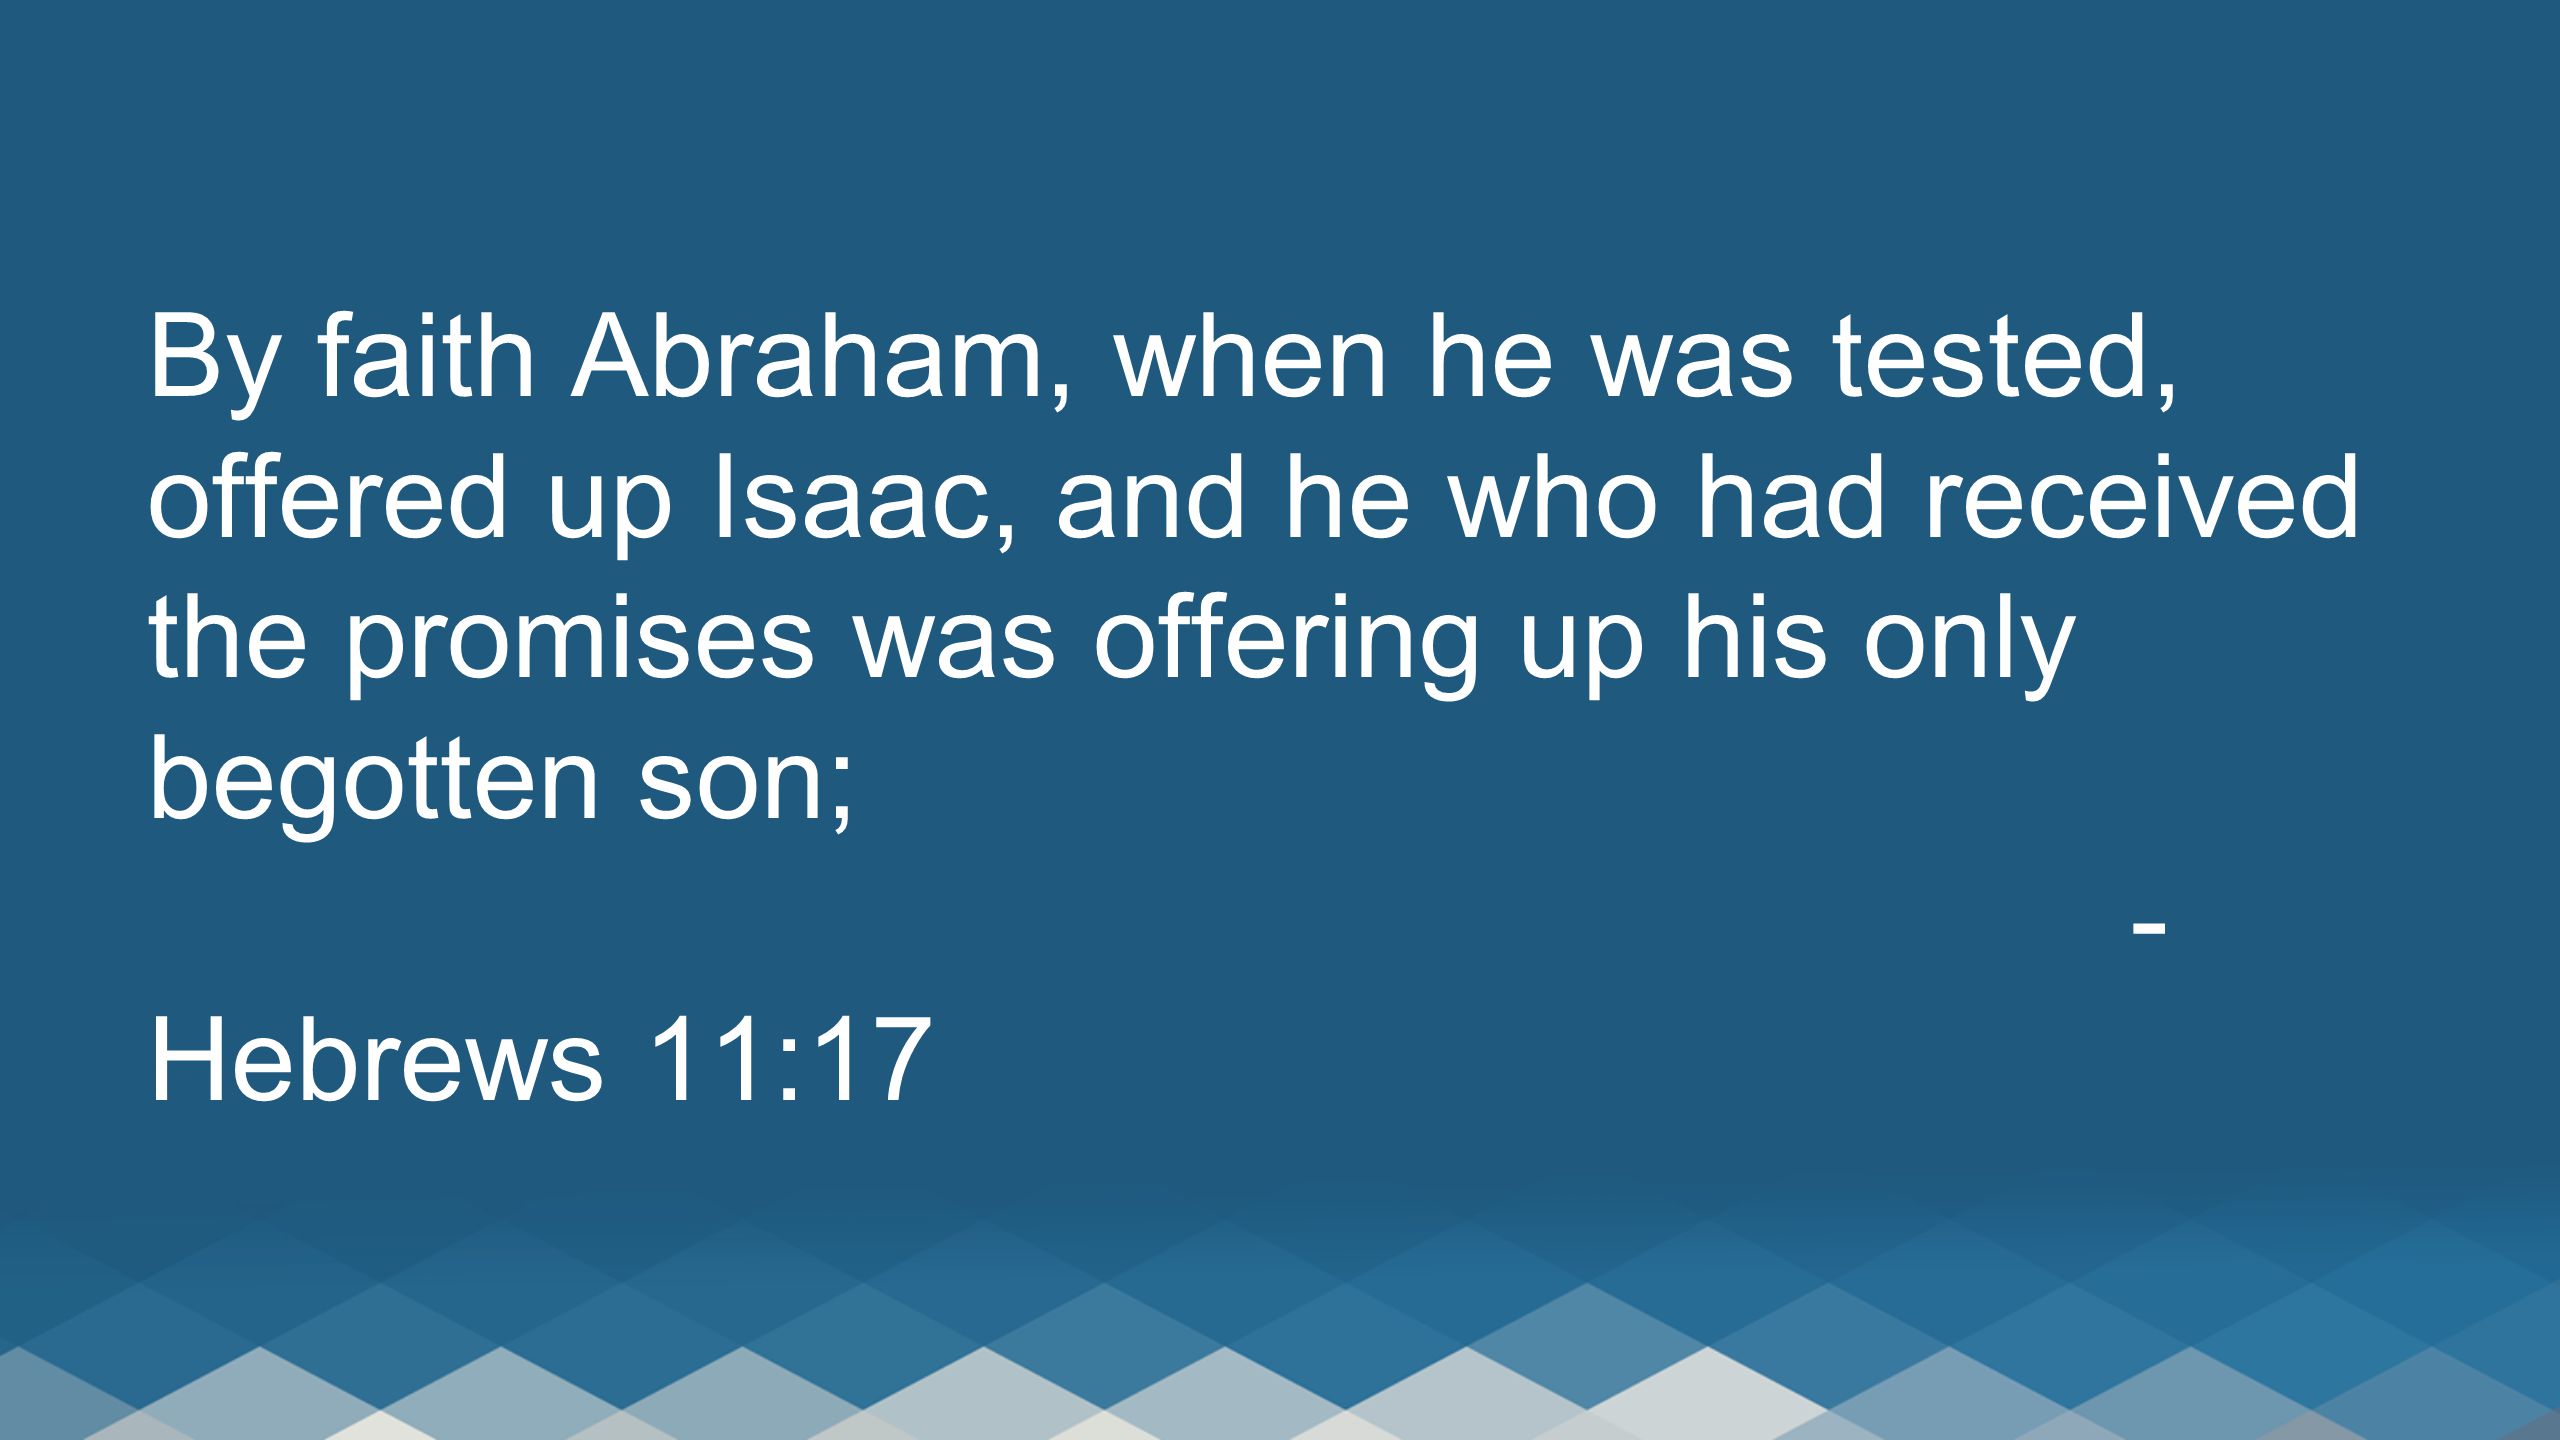 By faith Abraham, when he was tested, offered up Isaac, and he who had received the promises was offering up his only begotten son; - Hebrews 11:17